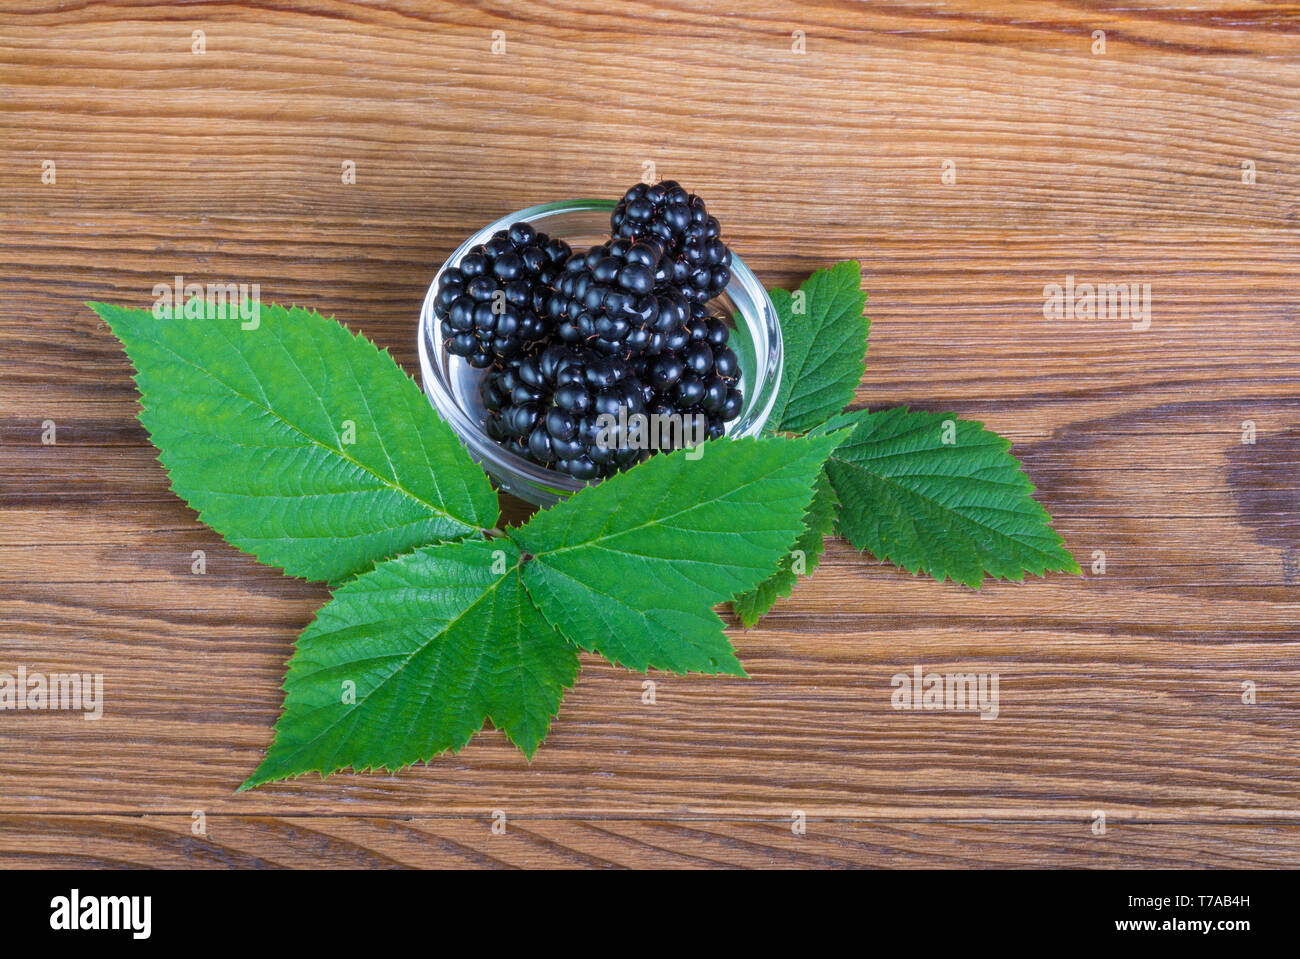 Ripe blackberries in small bowl. Green bramble leaves. Rubus. Pile of sweet juicy forest black berries in glass dish. Decorative twig, wood background. Stock Photo